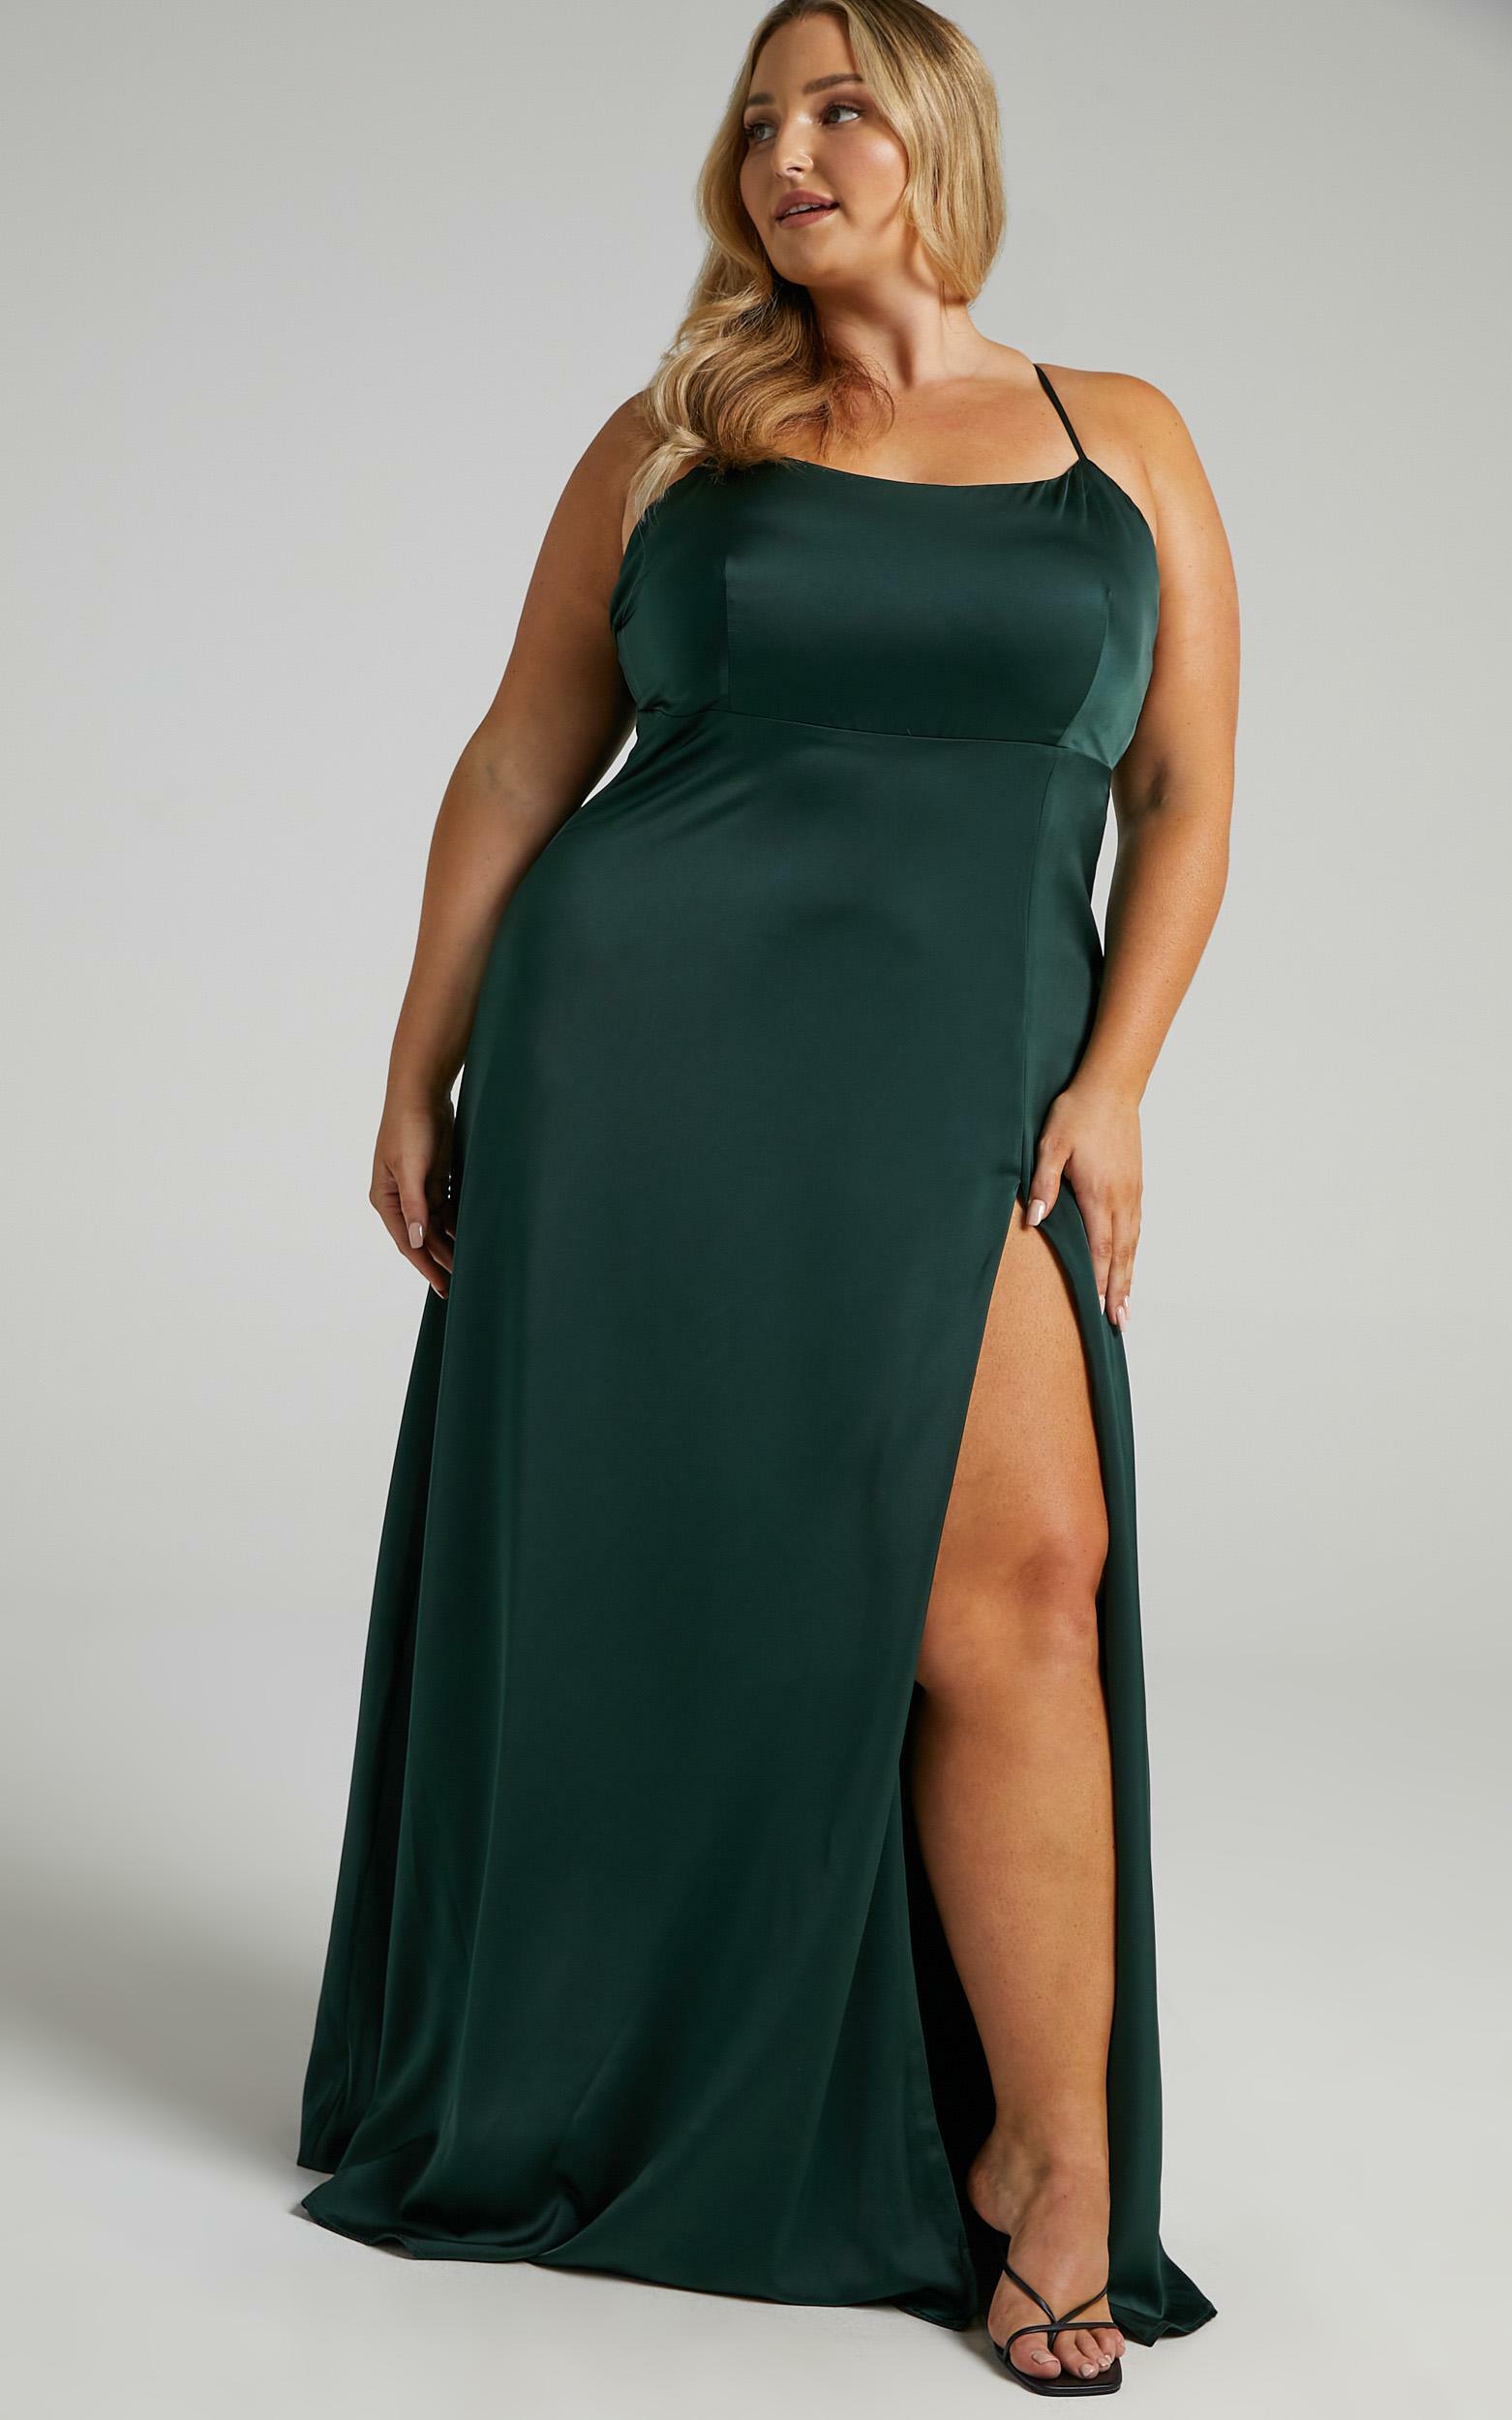 Will It Be Us Dress in Emerald - 06, GRN3, hi-res image number null